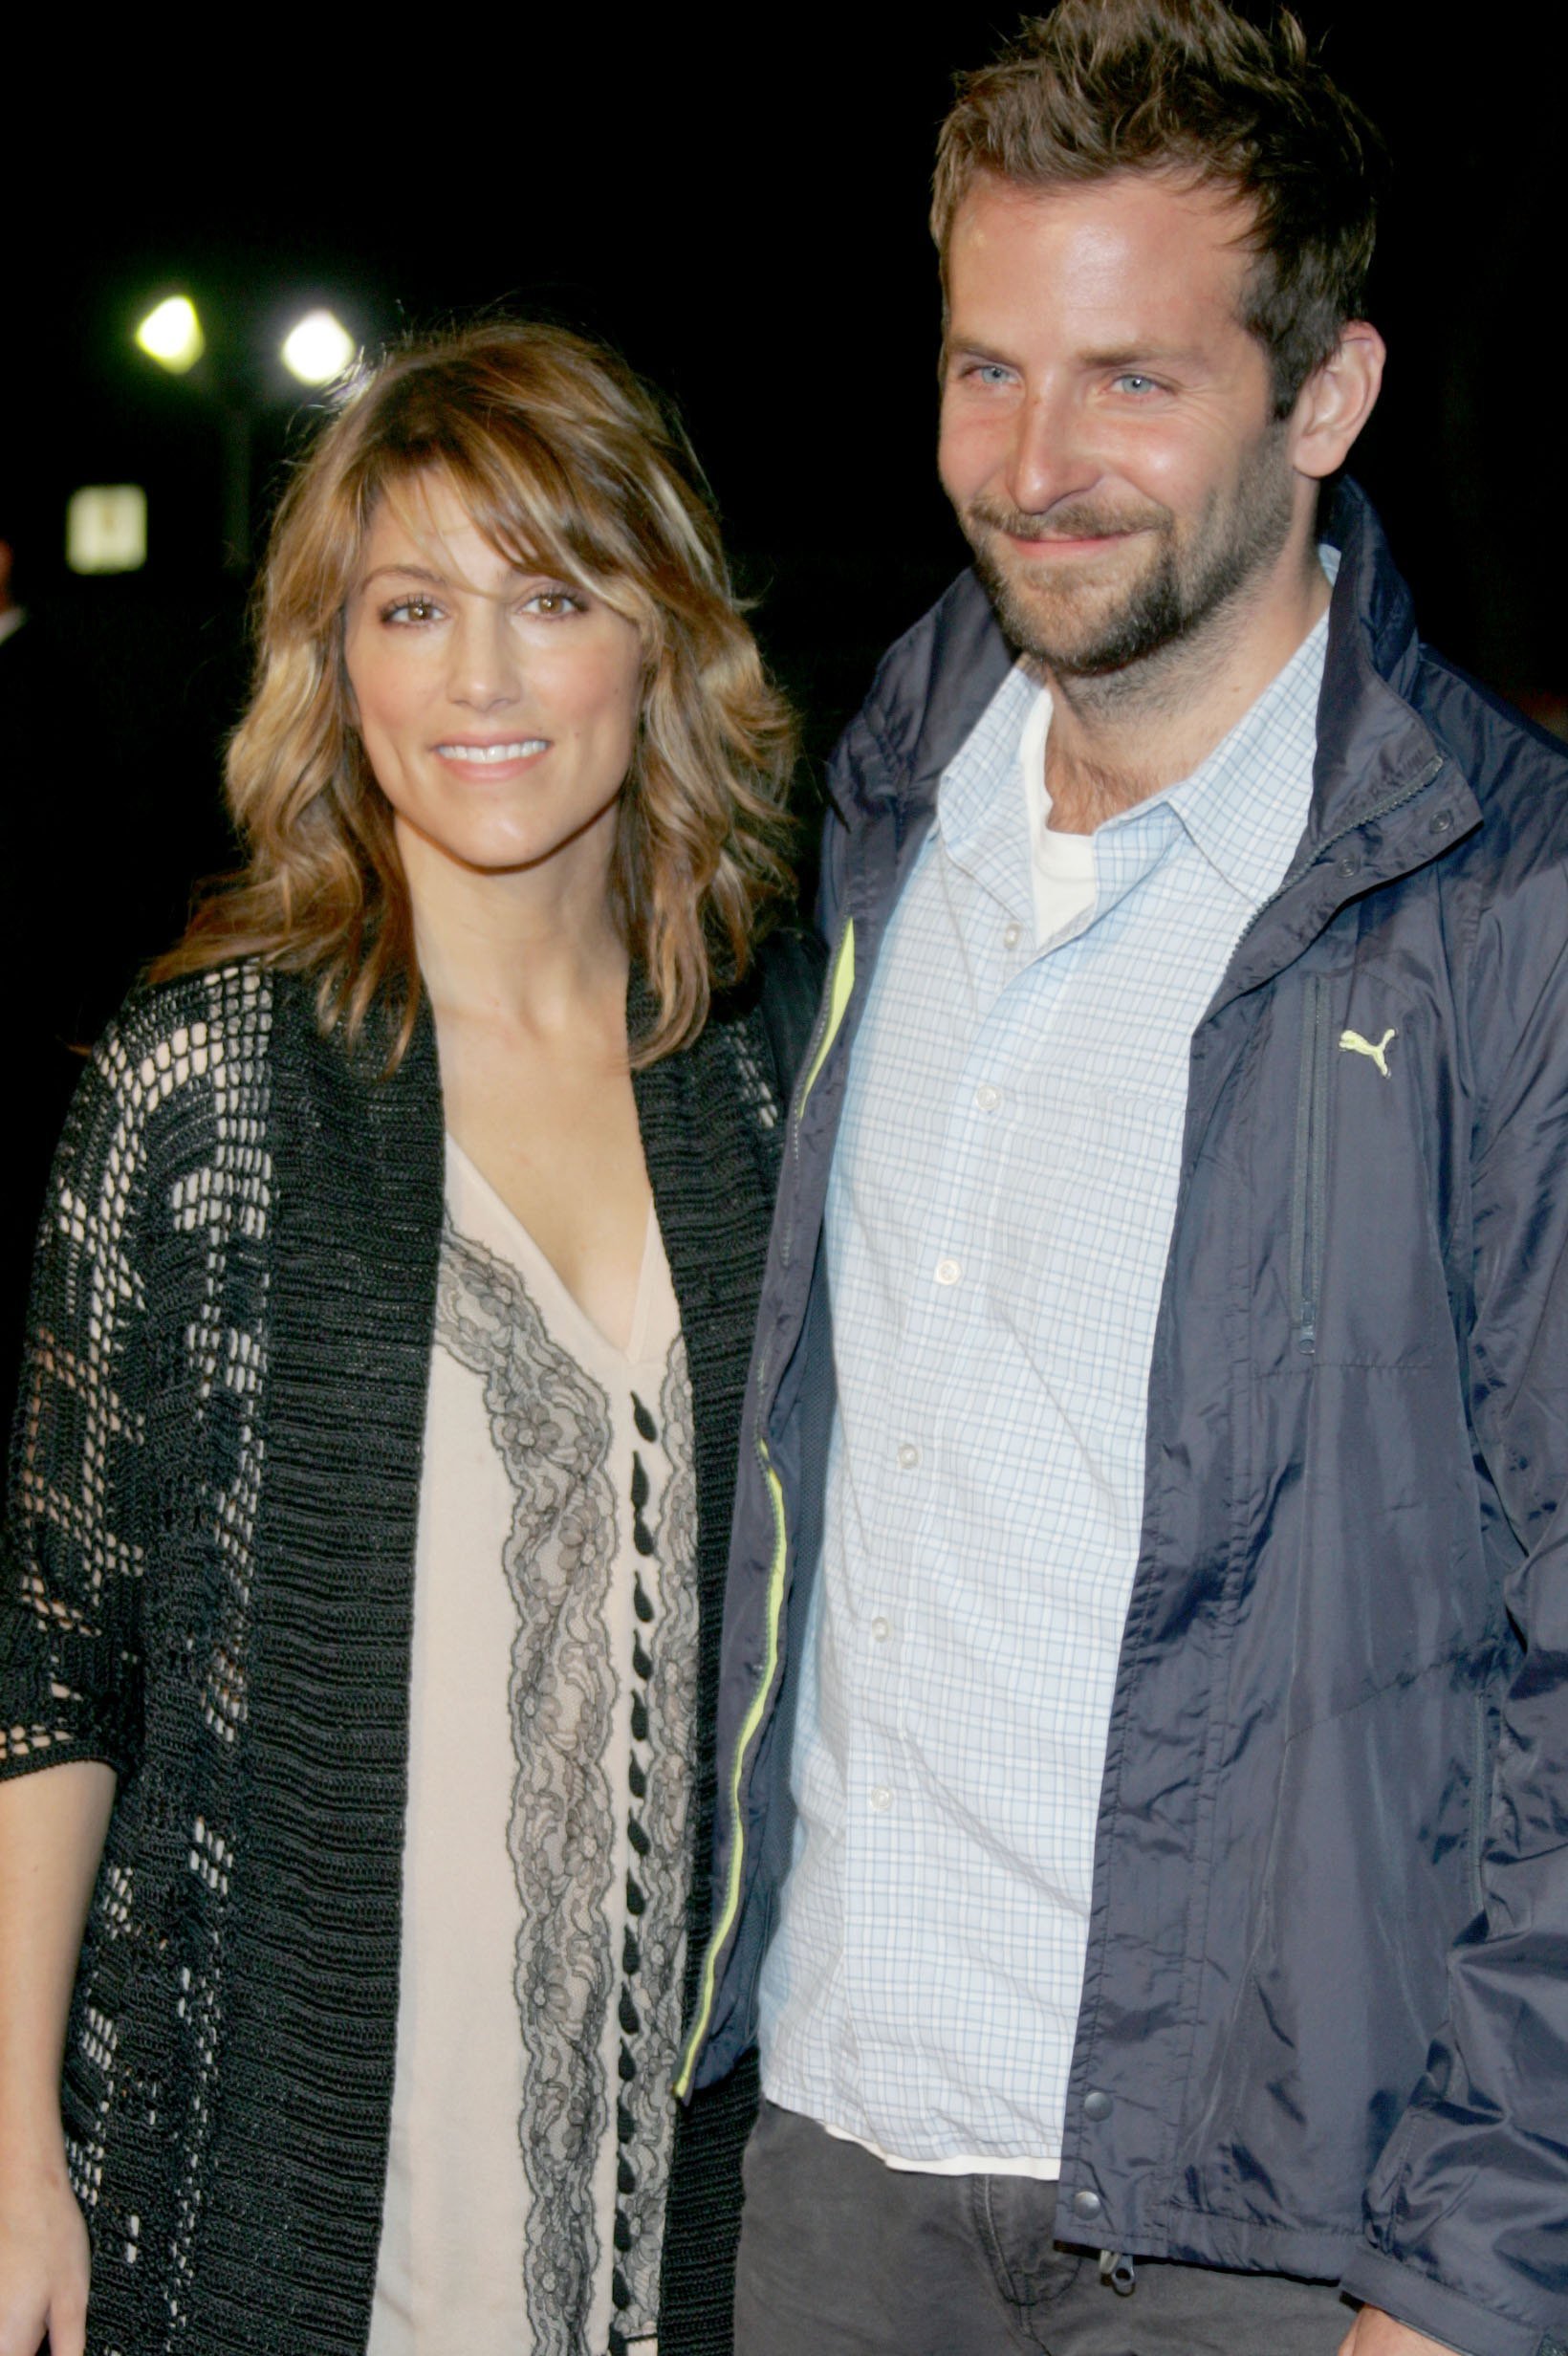 Jennifer Esposito and Bradley Cooper at the premiere of "Babel" held at the FOX Westwood Village theatre, 2006, Westwood, California. | Photo: Getty Images